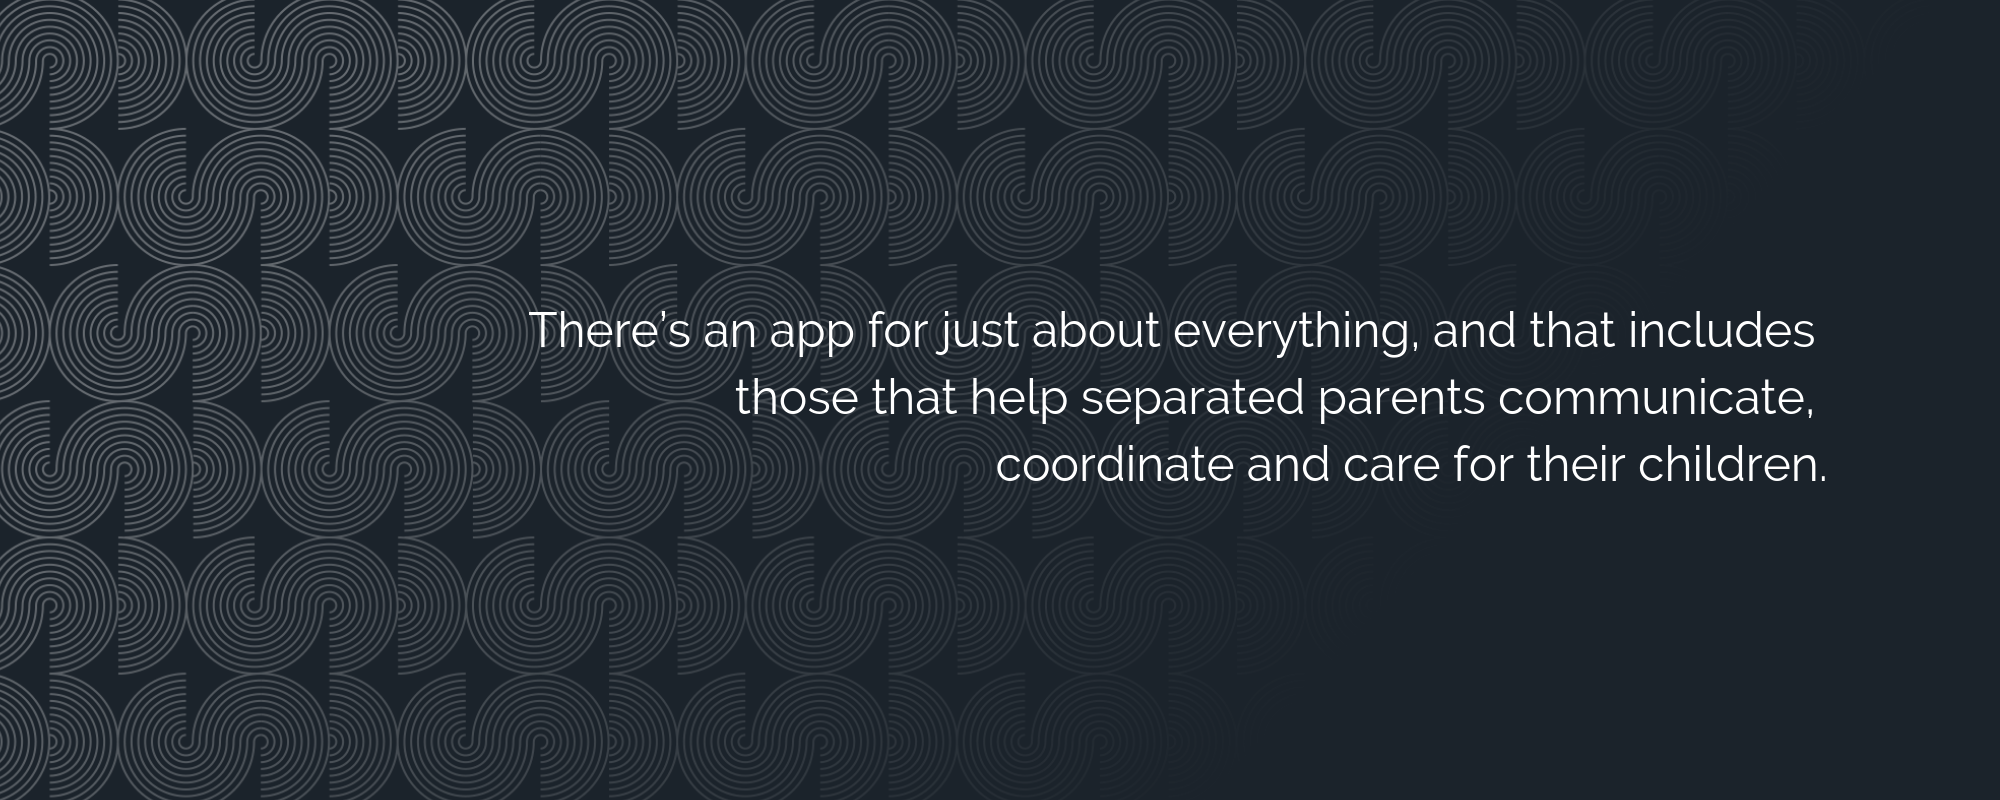 Shared Parenting Apps to Streamline Communication